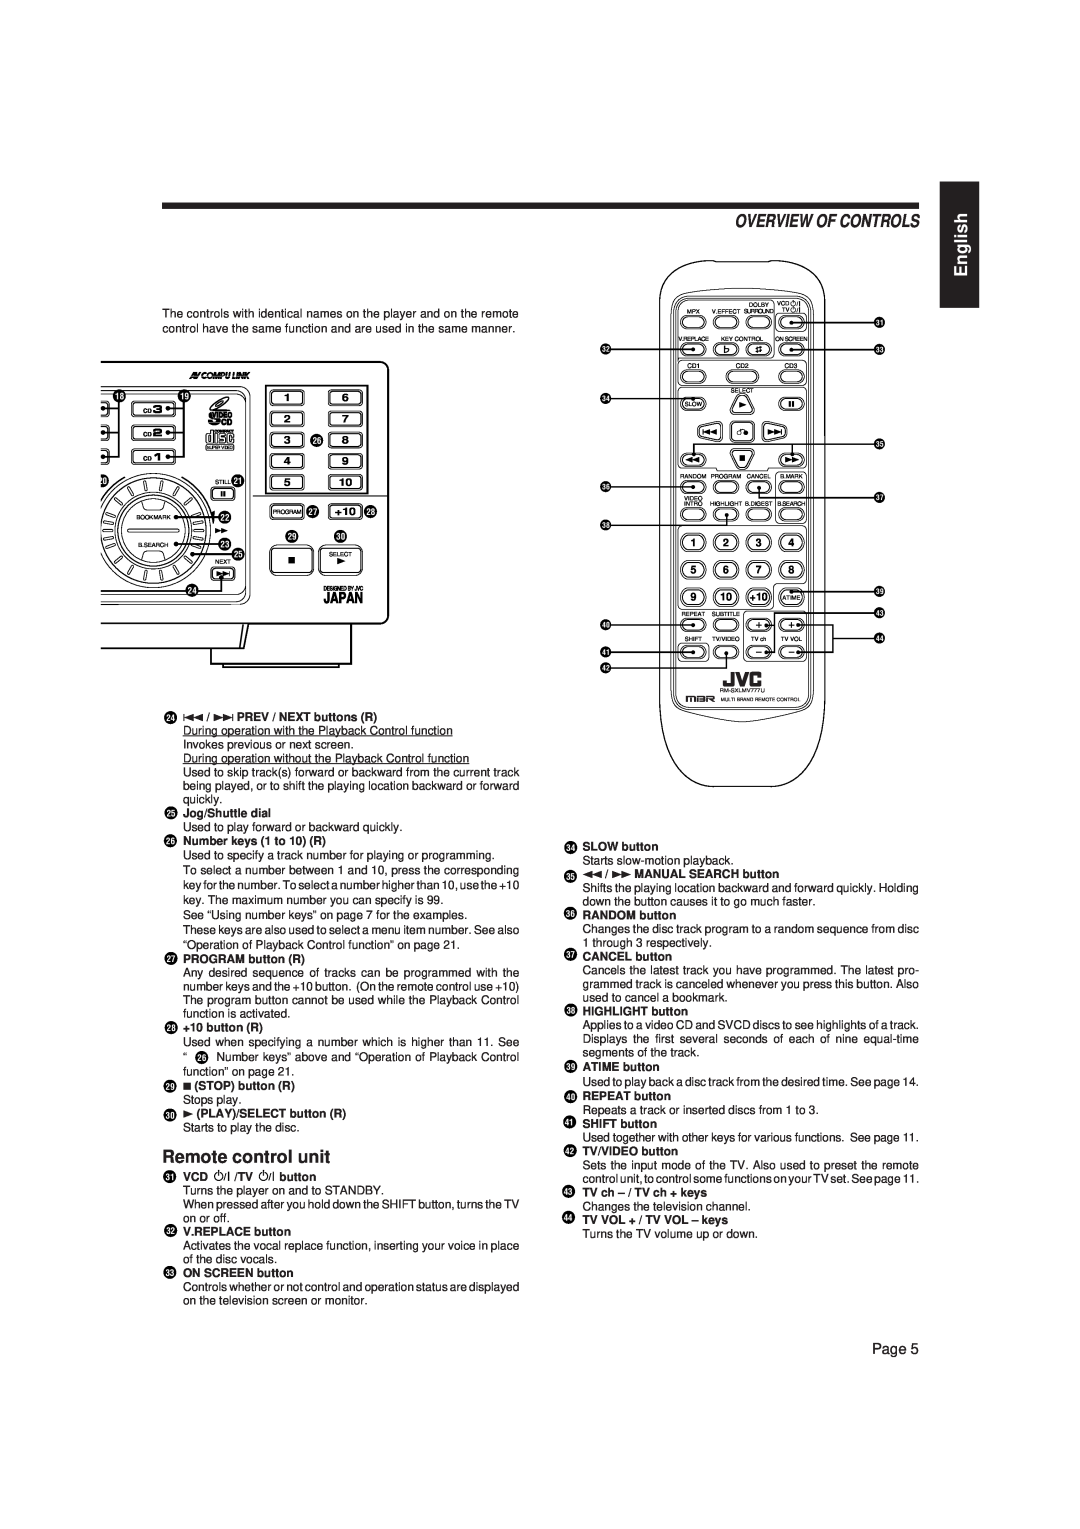 JVC XL-MV7000GD manual Remote control unit, Overview Of Controls, English, Page 